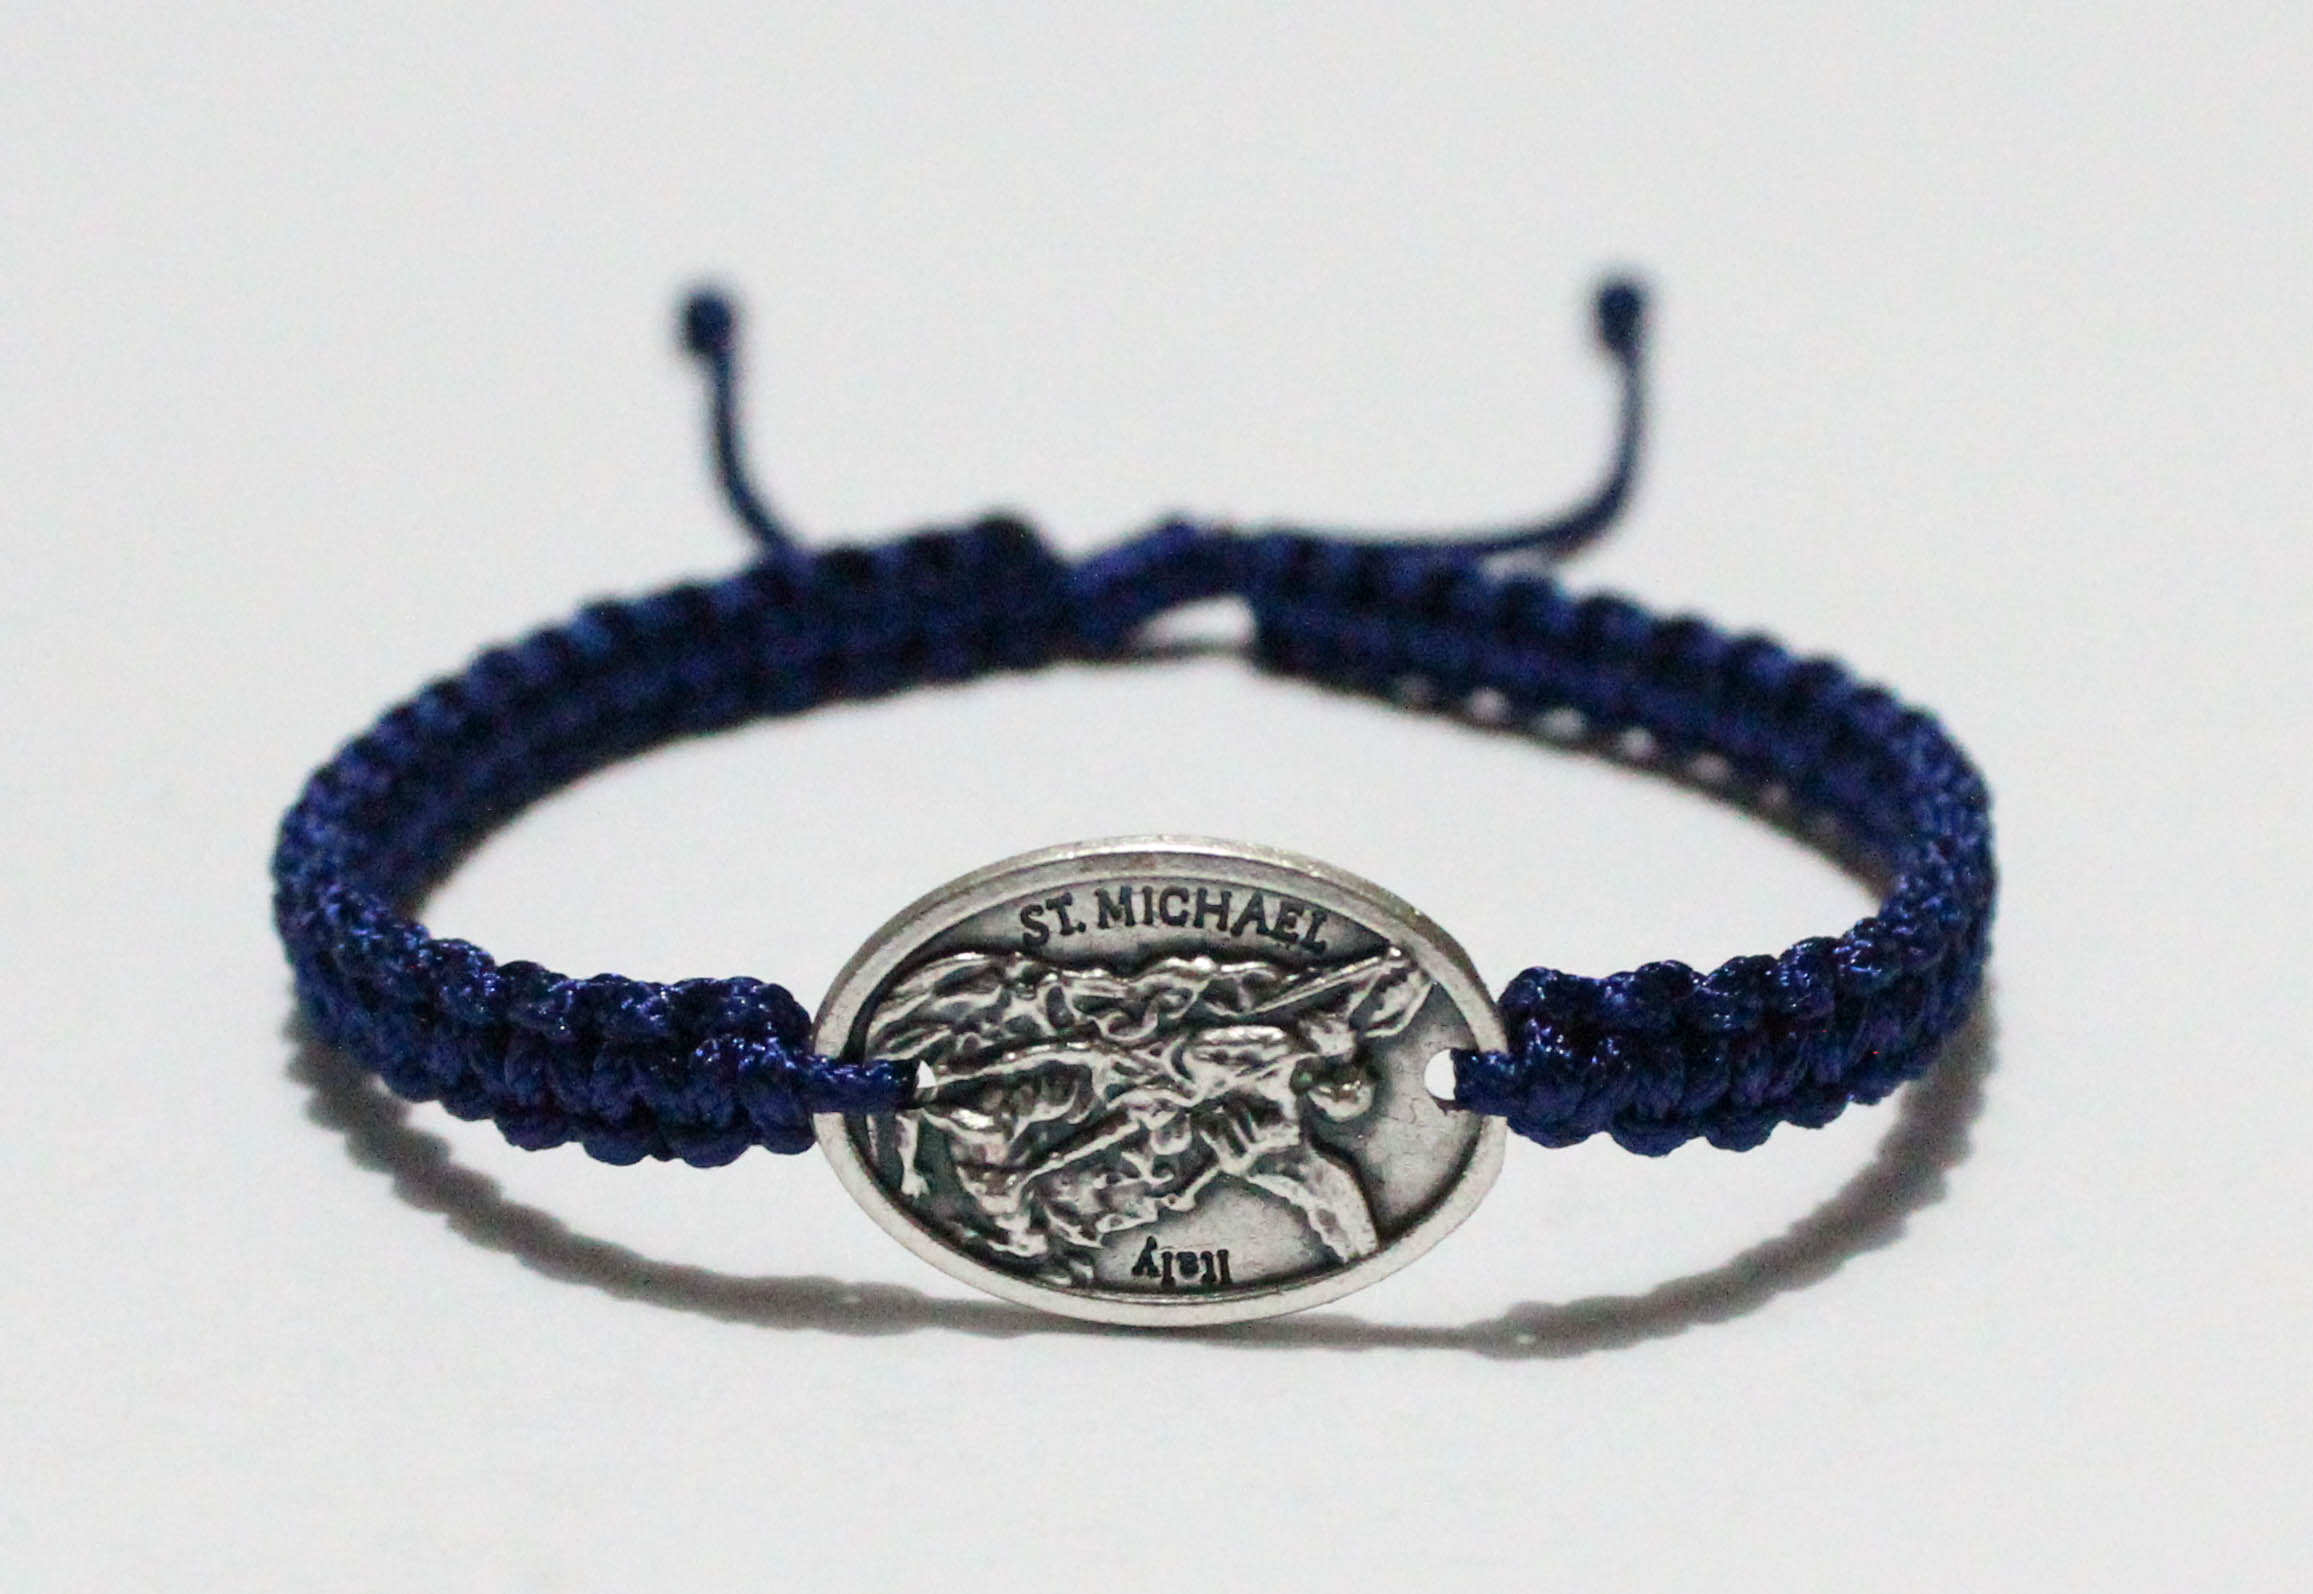 San Miguel Arcangel | St Michael Gifts of Saint Michael Bracelet Archangel  Michael Protection for Police Officers and Fire Fighters as The Patron Saint  Michael for Protection of The St Michael Angel -